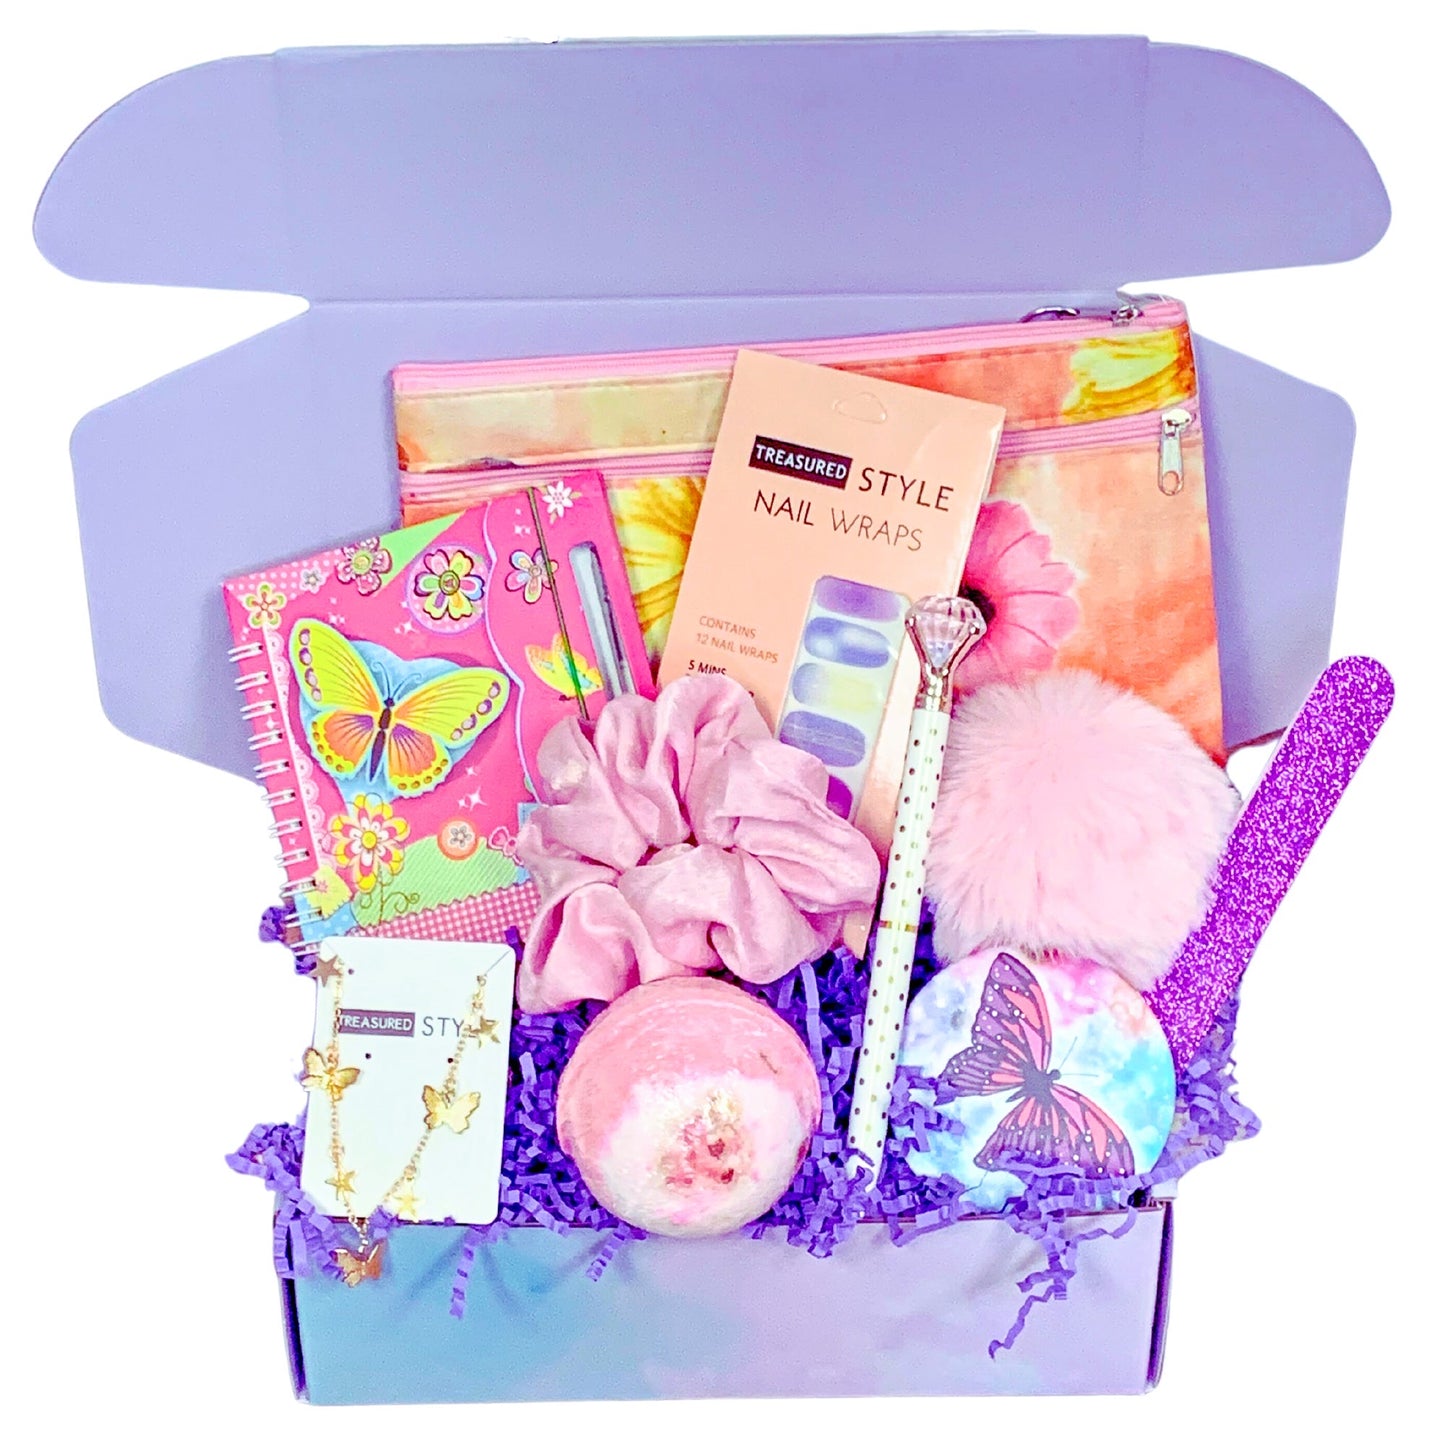 Teen-Girl-Gift-Box-Teen-Gifts-Houston-Texas-Gift-Shop, bath bomb, tween gifts for her, granddaughter care package, self care kit 